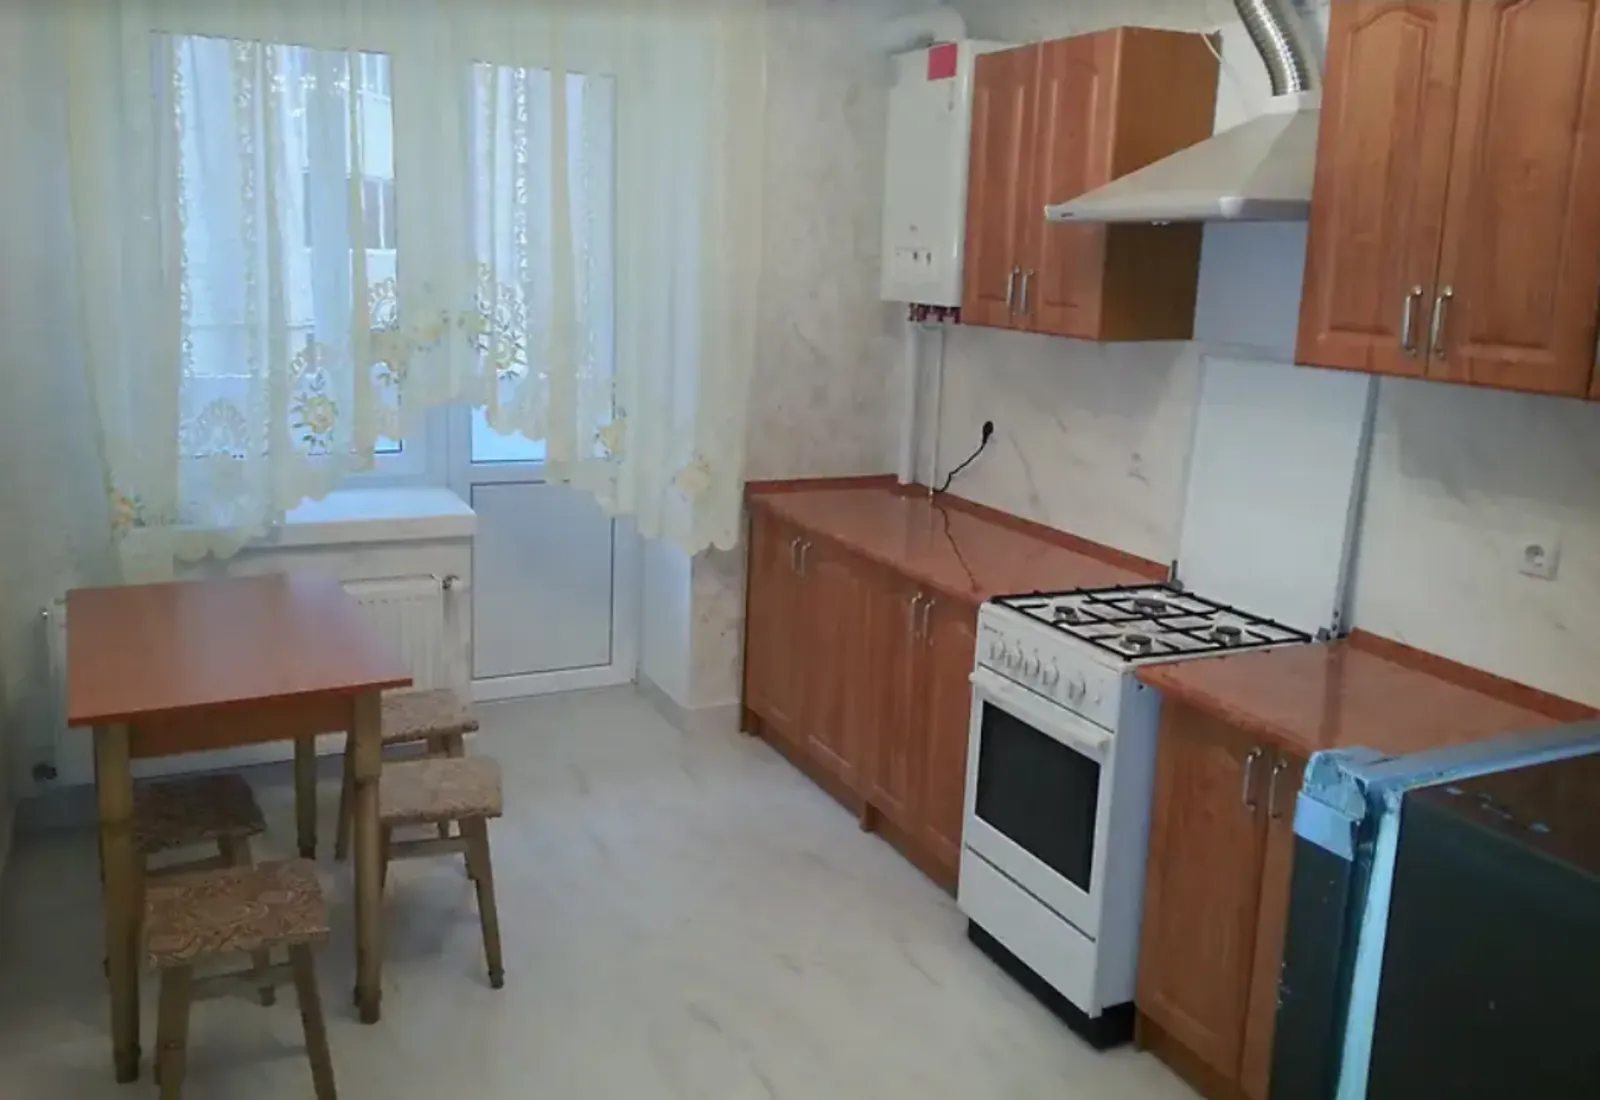 Apartment for rent. 61 m², 2nd floor/10 floors. Nad Yarom vul., Ternopil. 